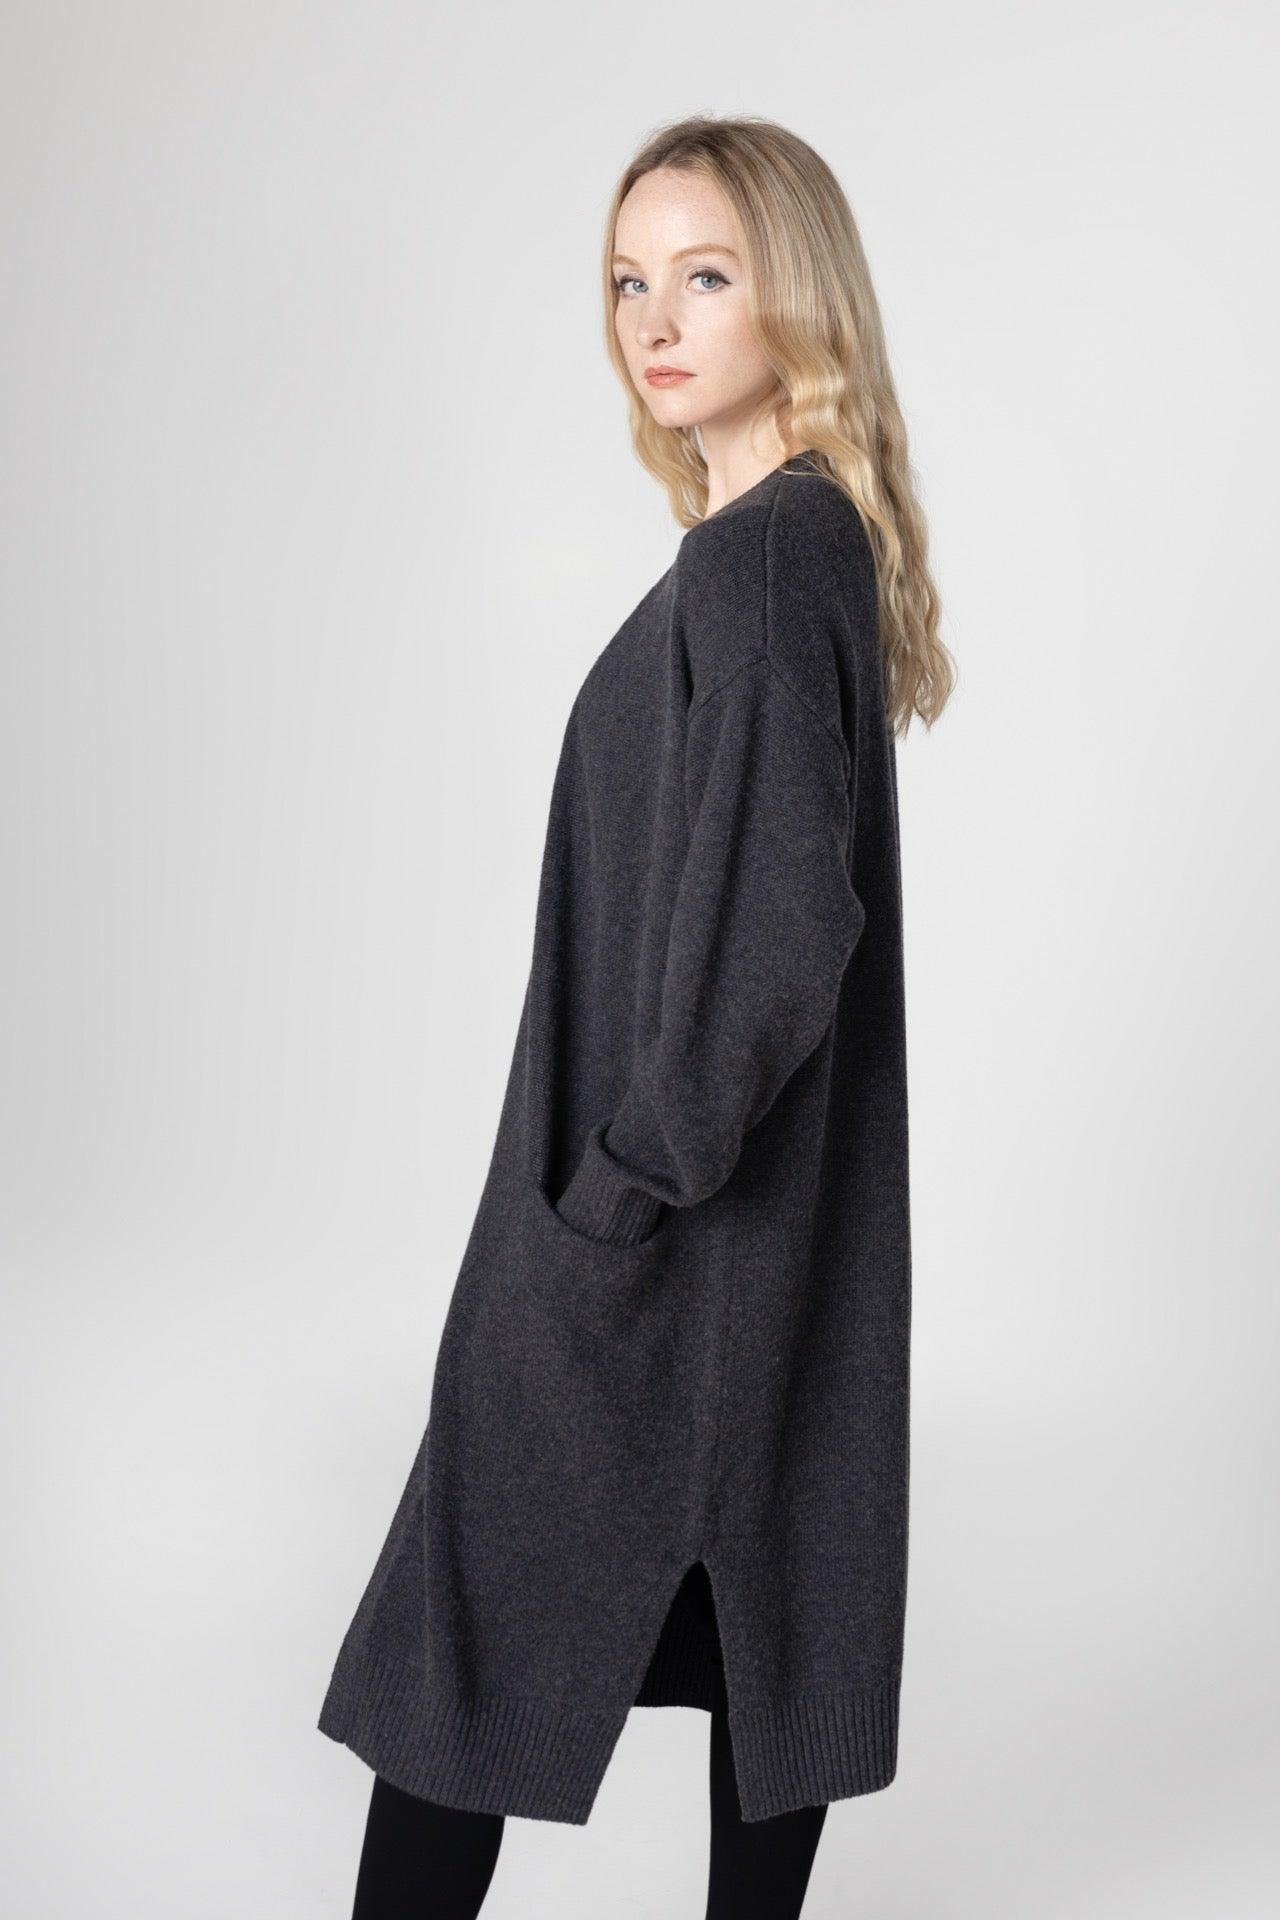 Women's Light Weight Side Slit Long Cardigan - NOT LABELED